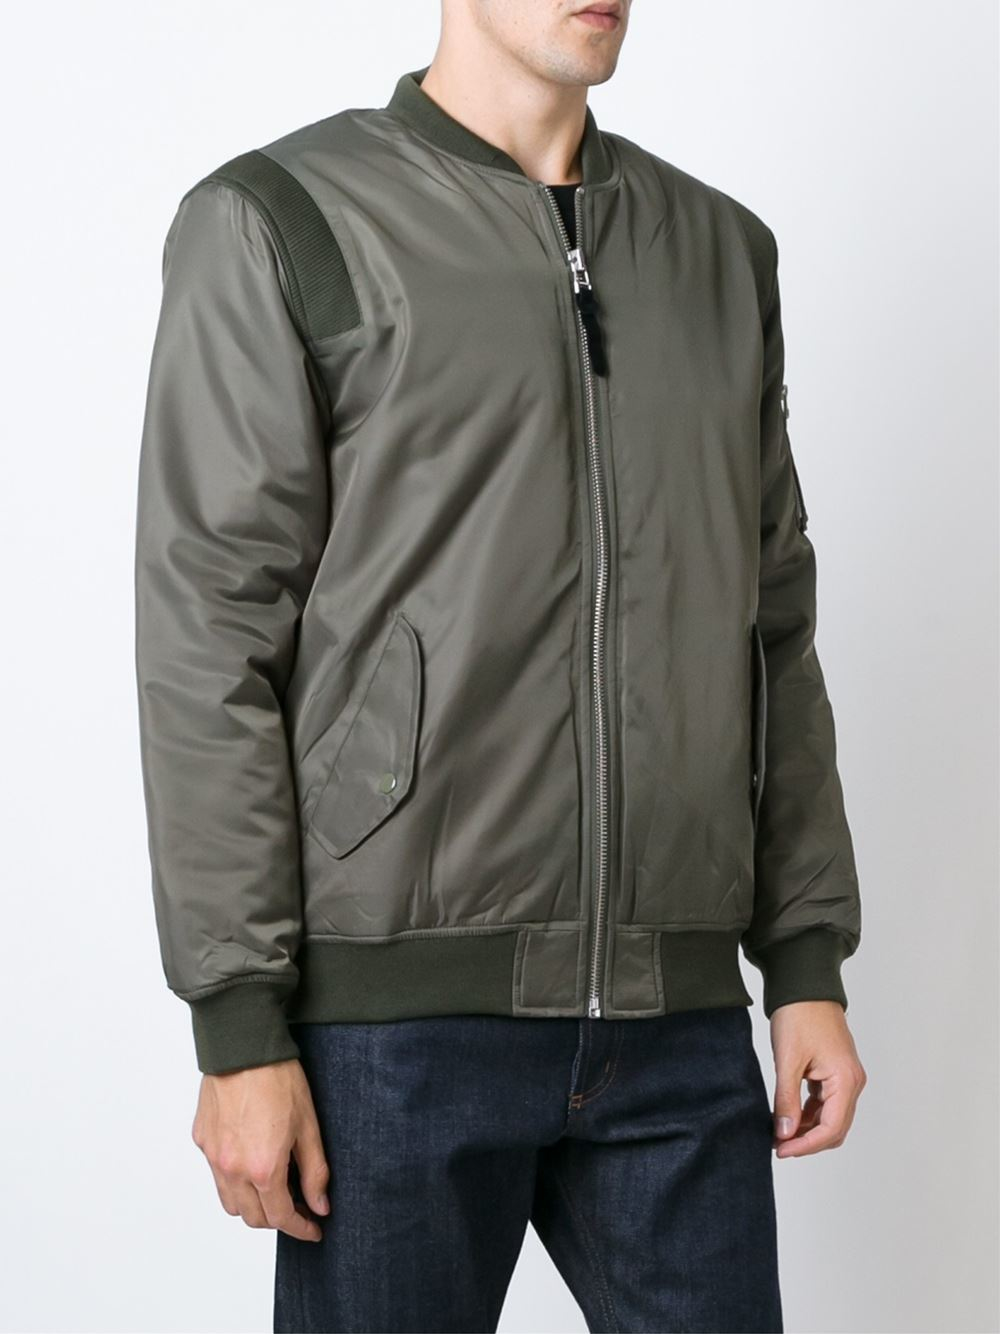 Lyst - Stussy Classic Bomber Jacket in Green for Men